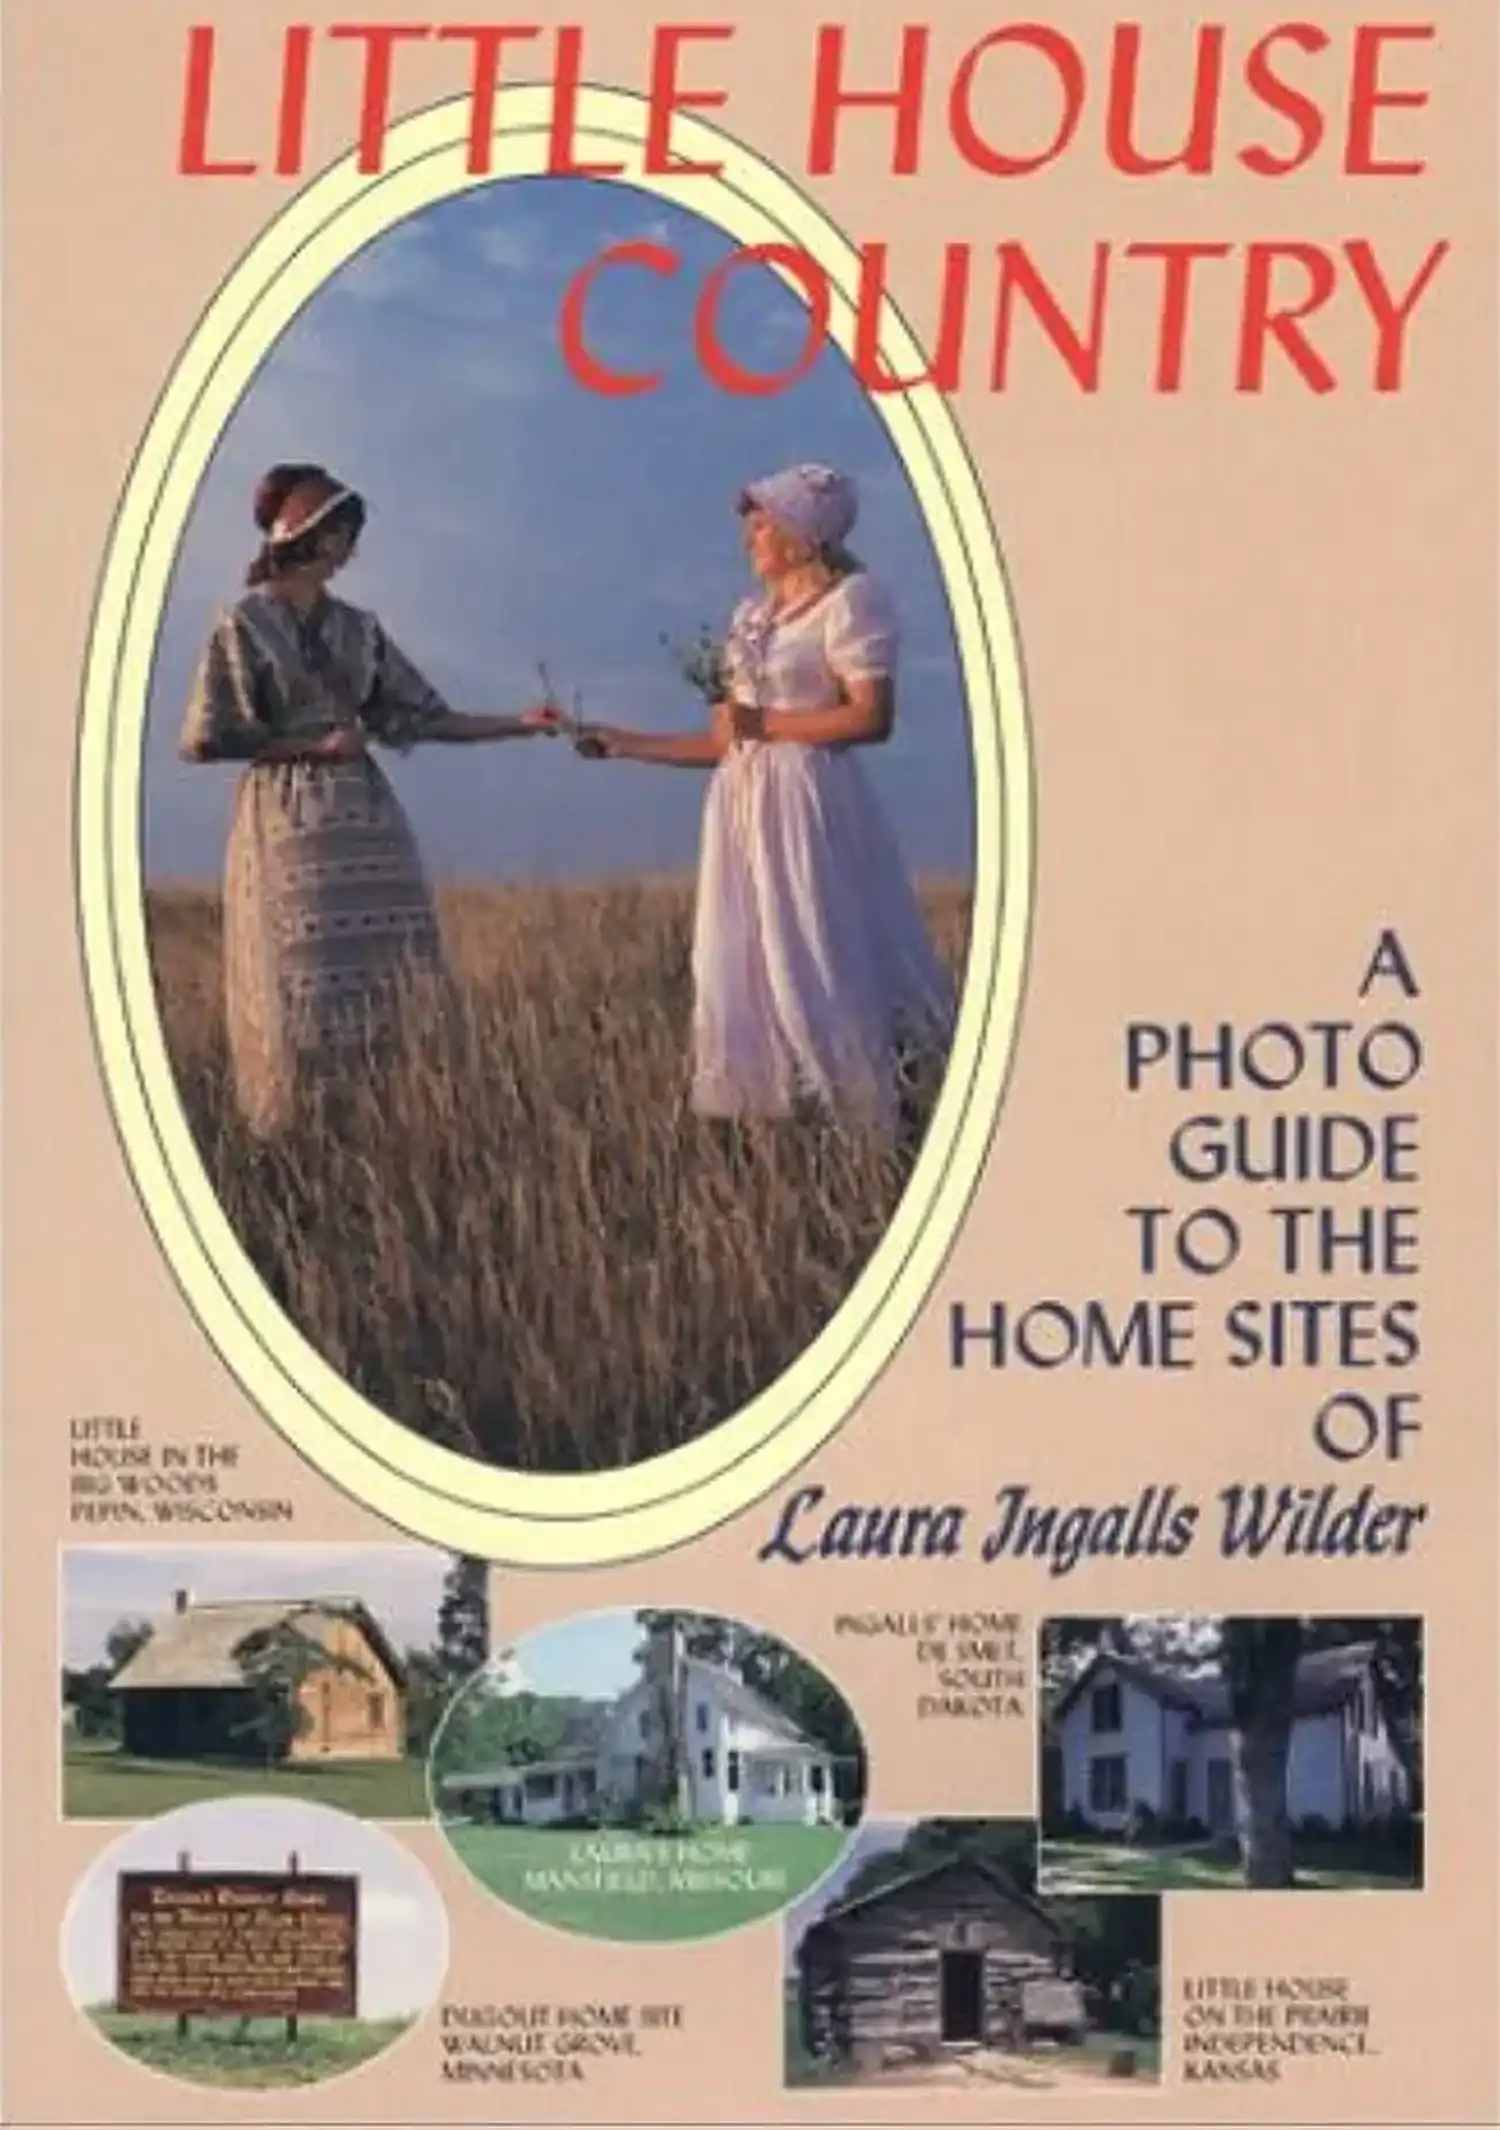 Little-House-Country-A-Photo-Guide-to-the-Home-Sites-of-Laura-Ingalls-Wilder